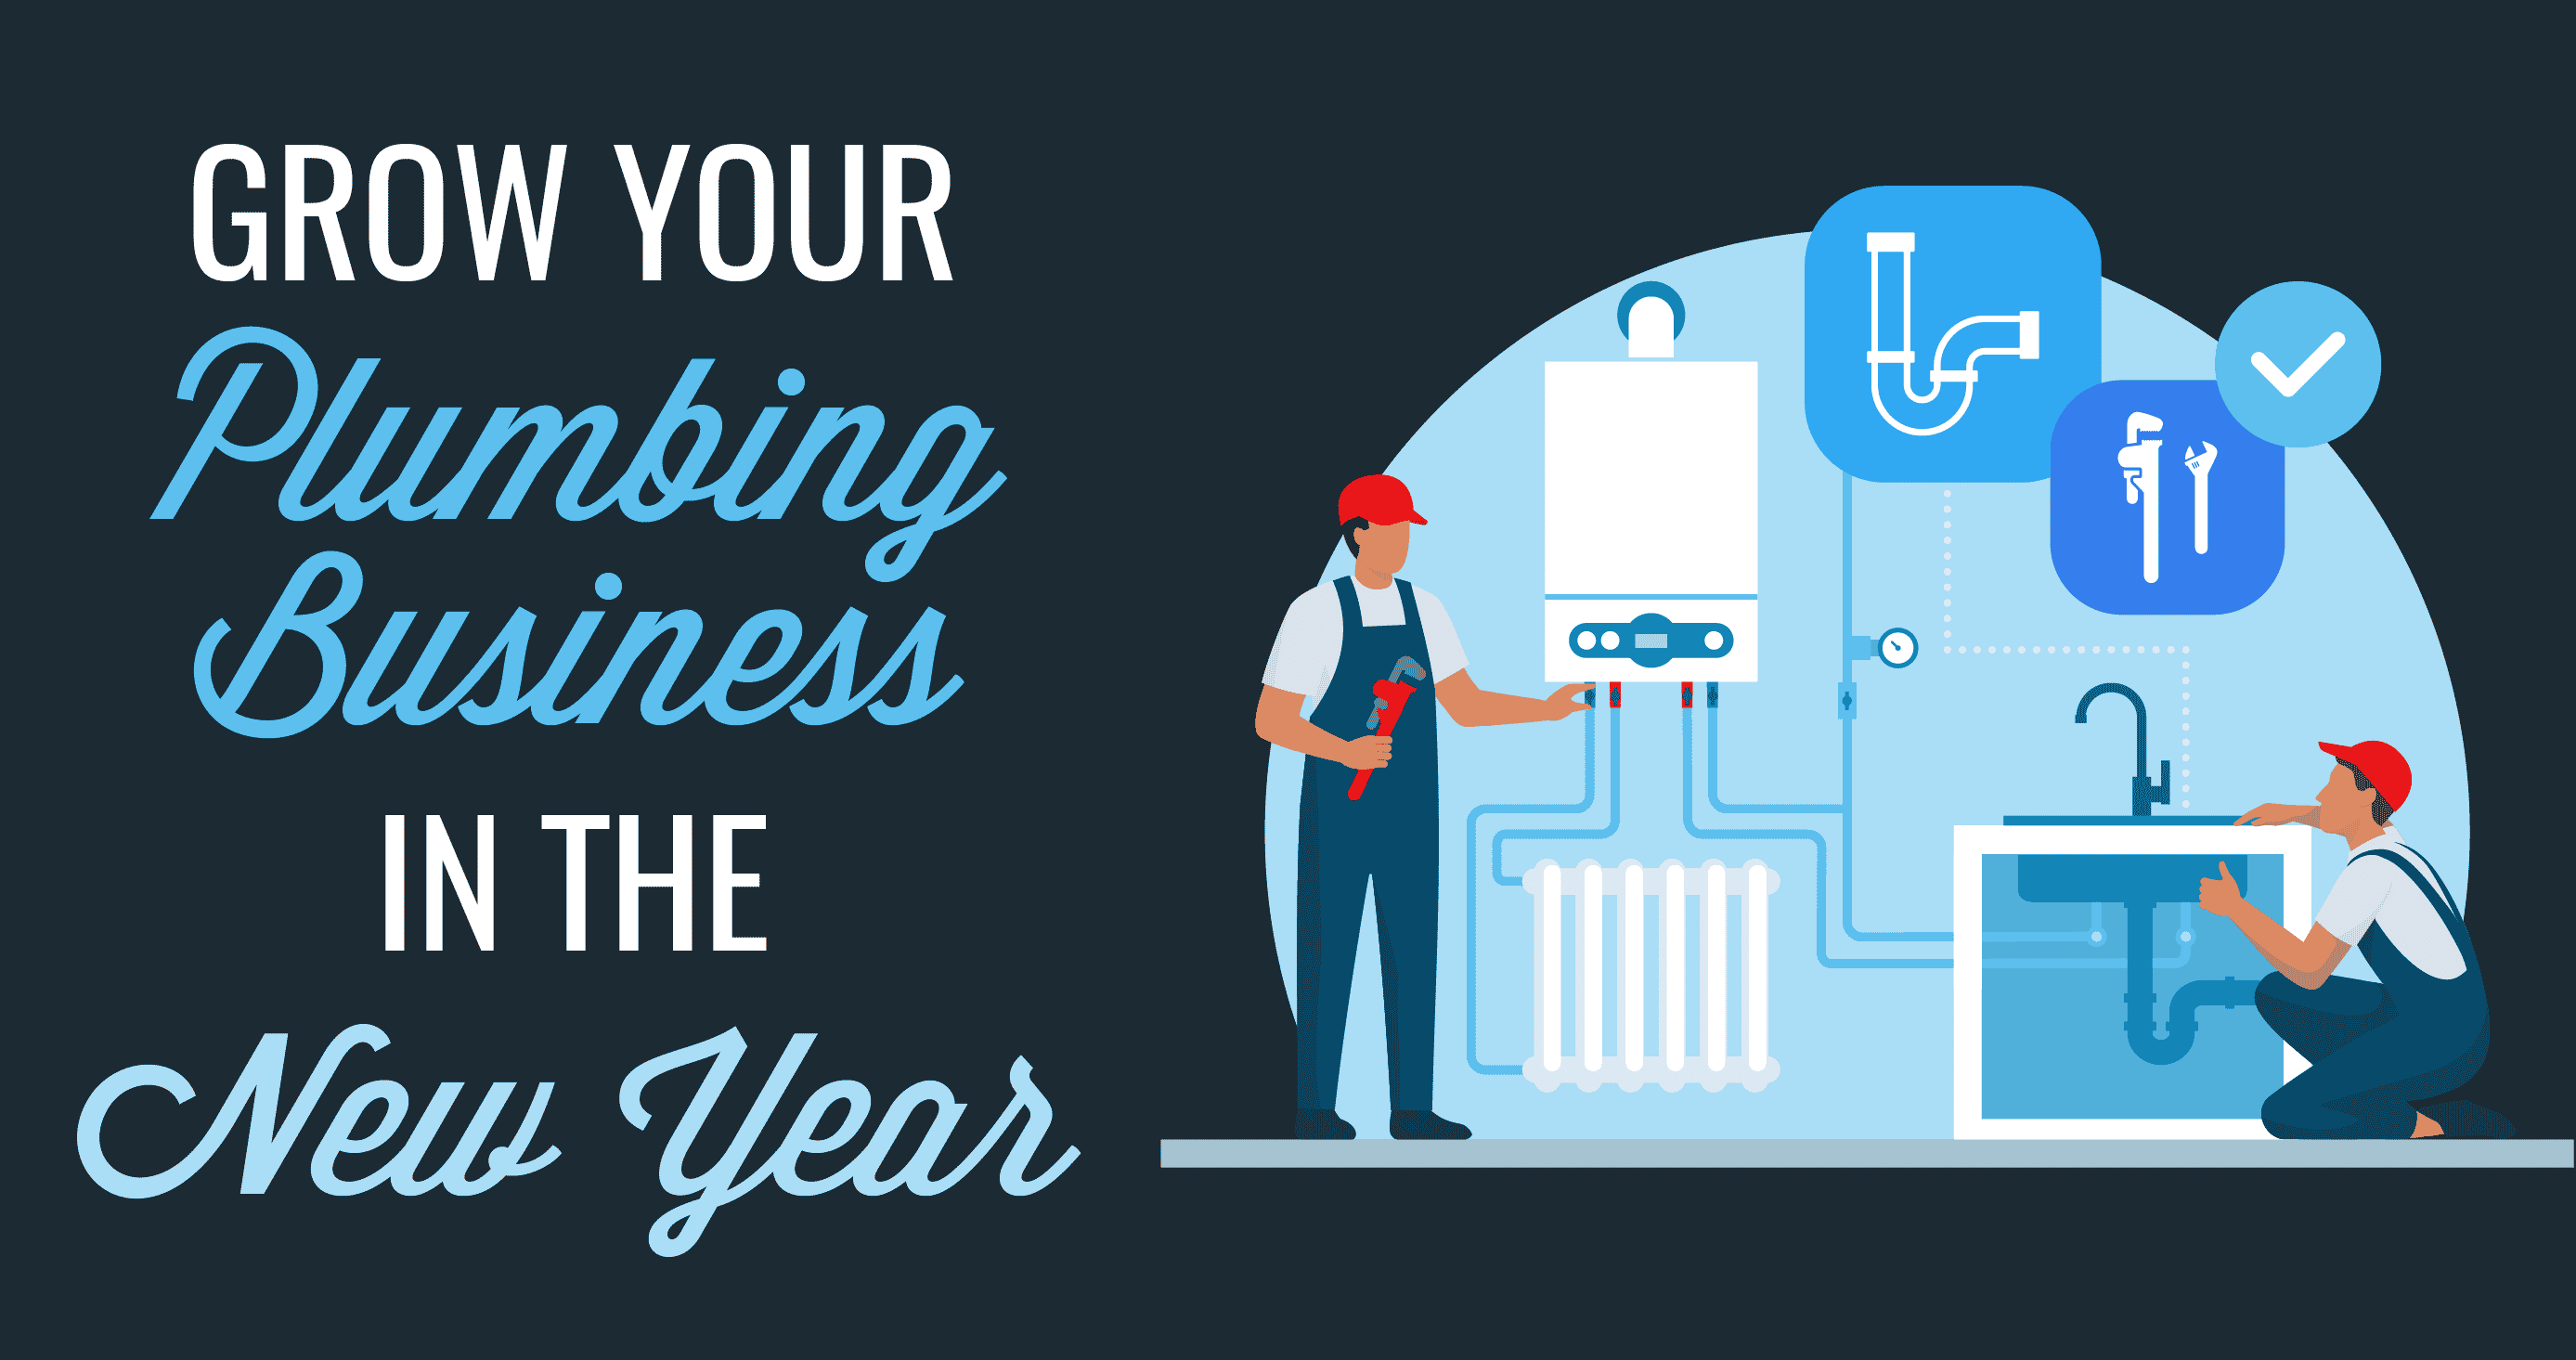 Grow Your Plumbing Business in the New Year